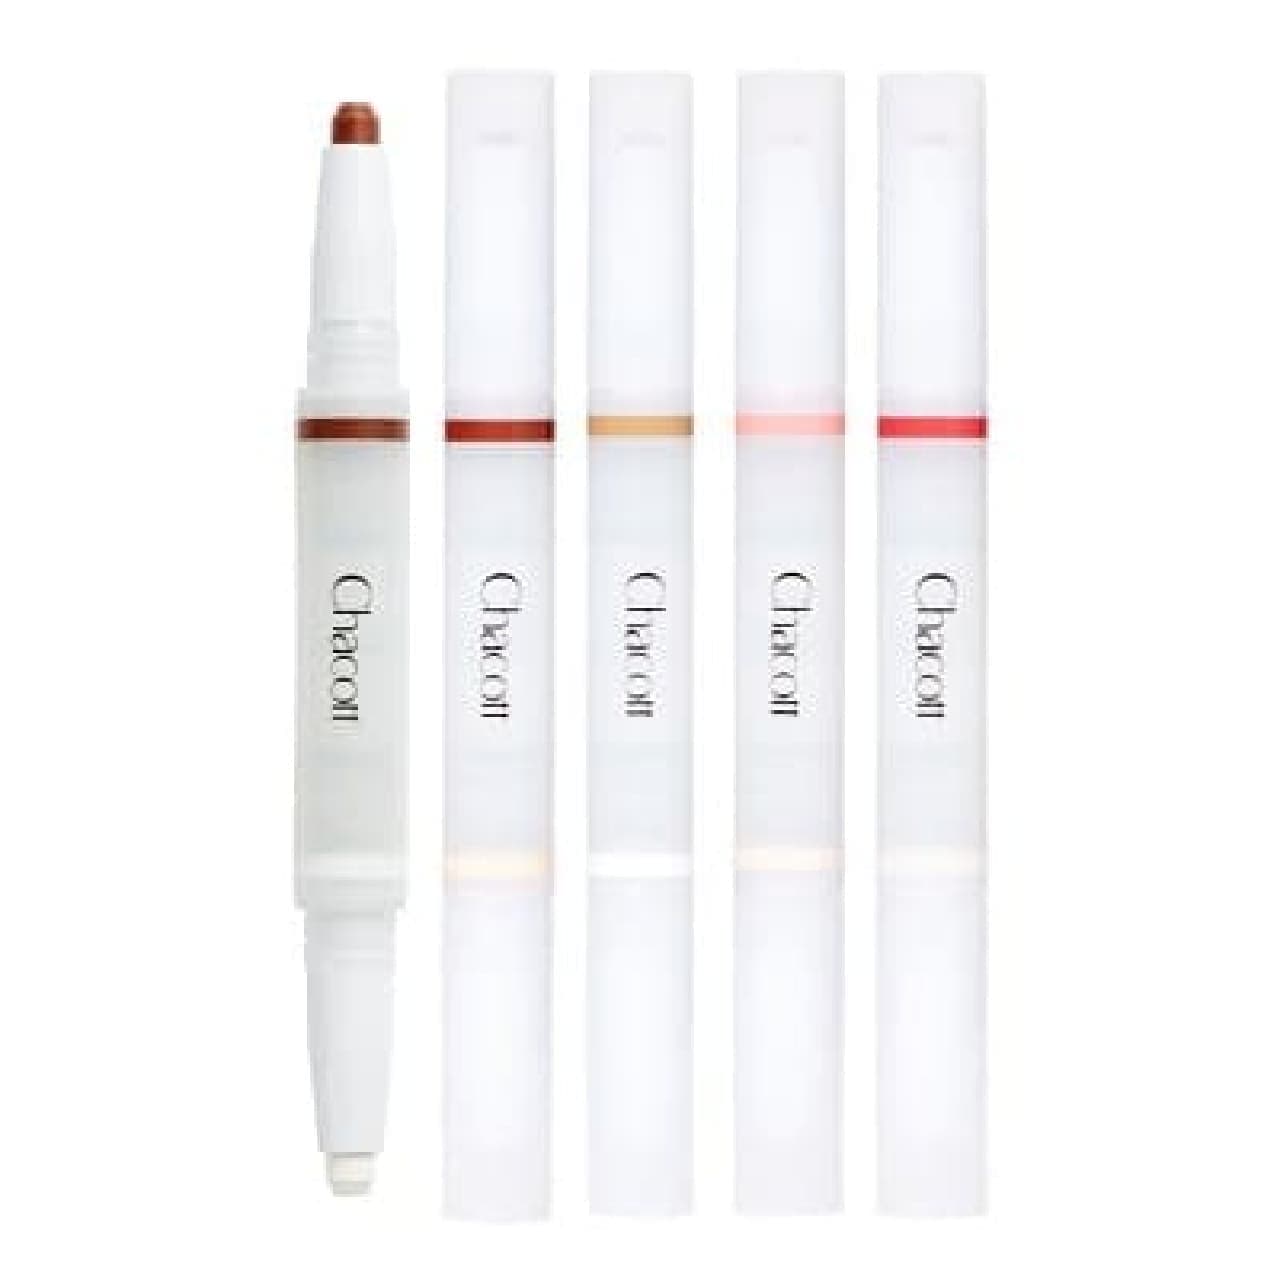 Chacot Cosmetics "Double Multi Crayon